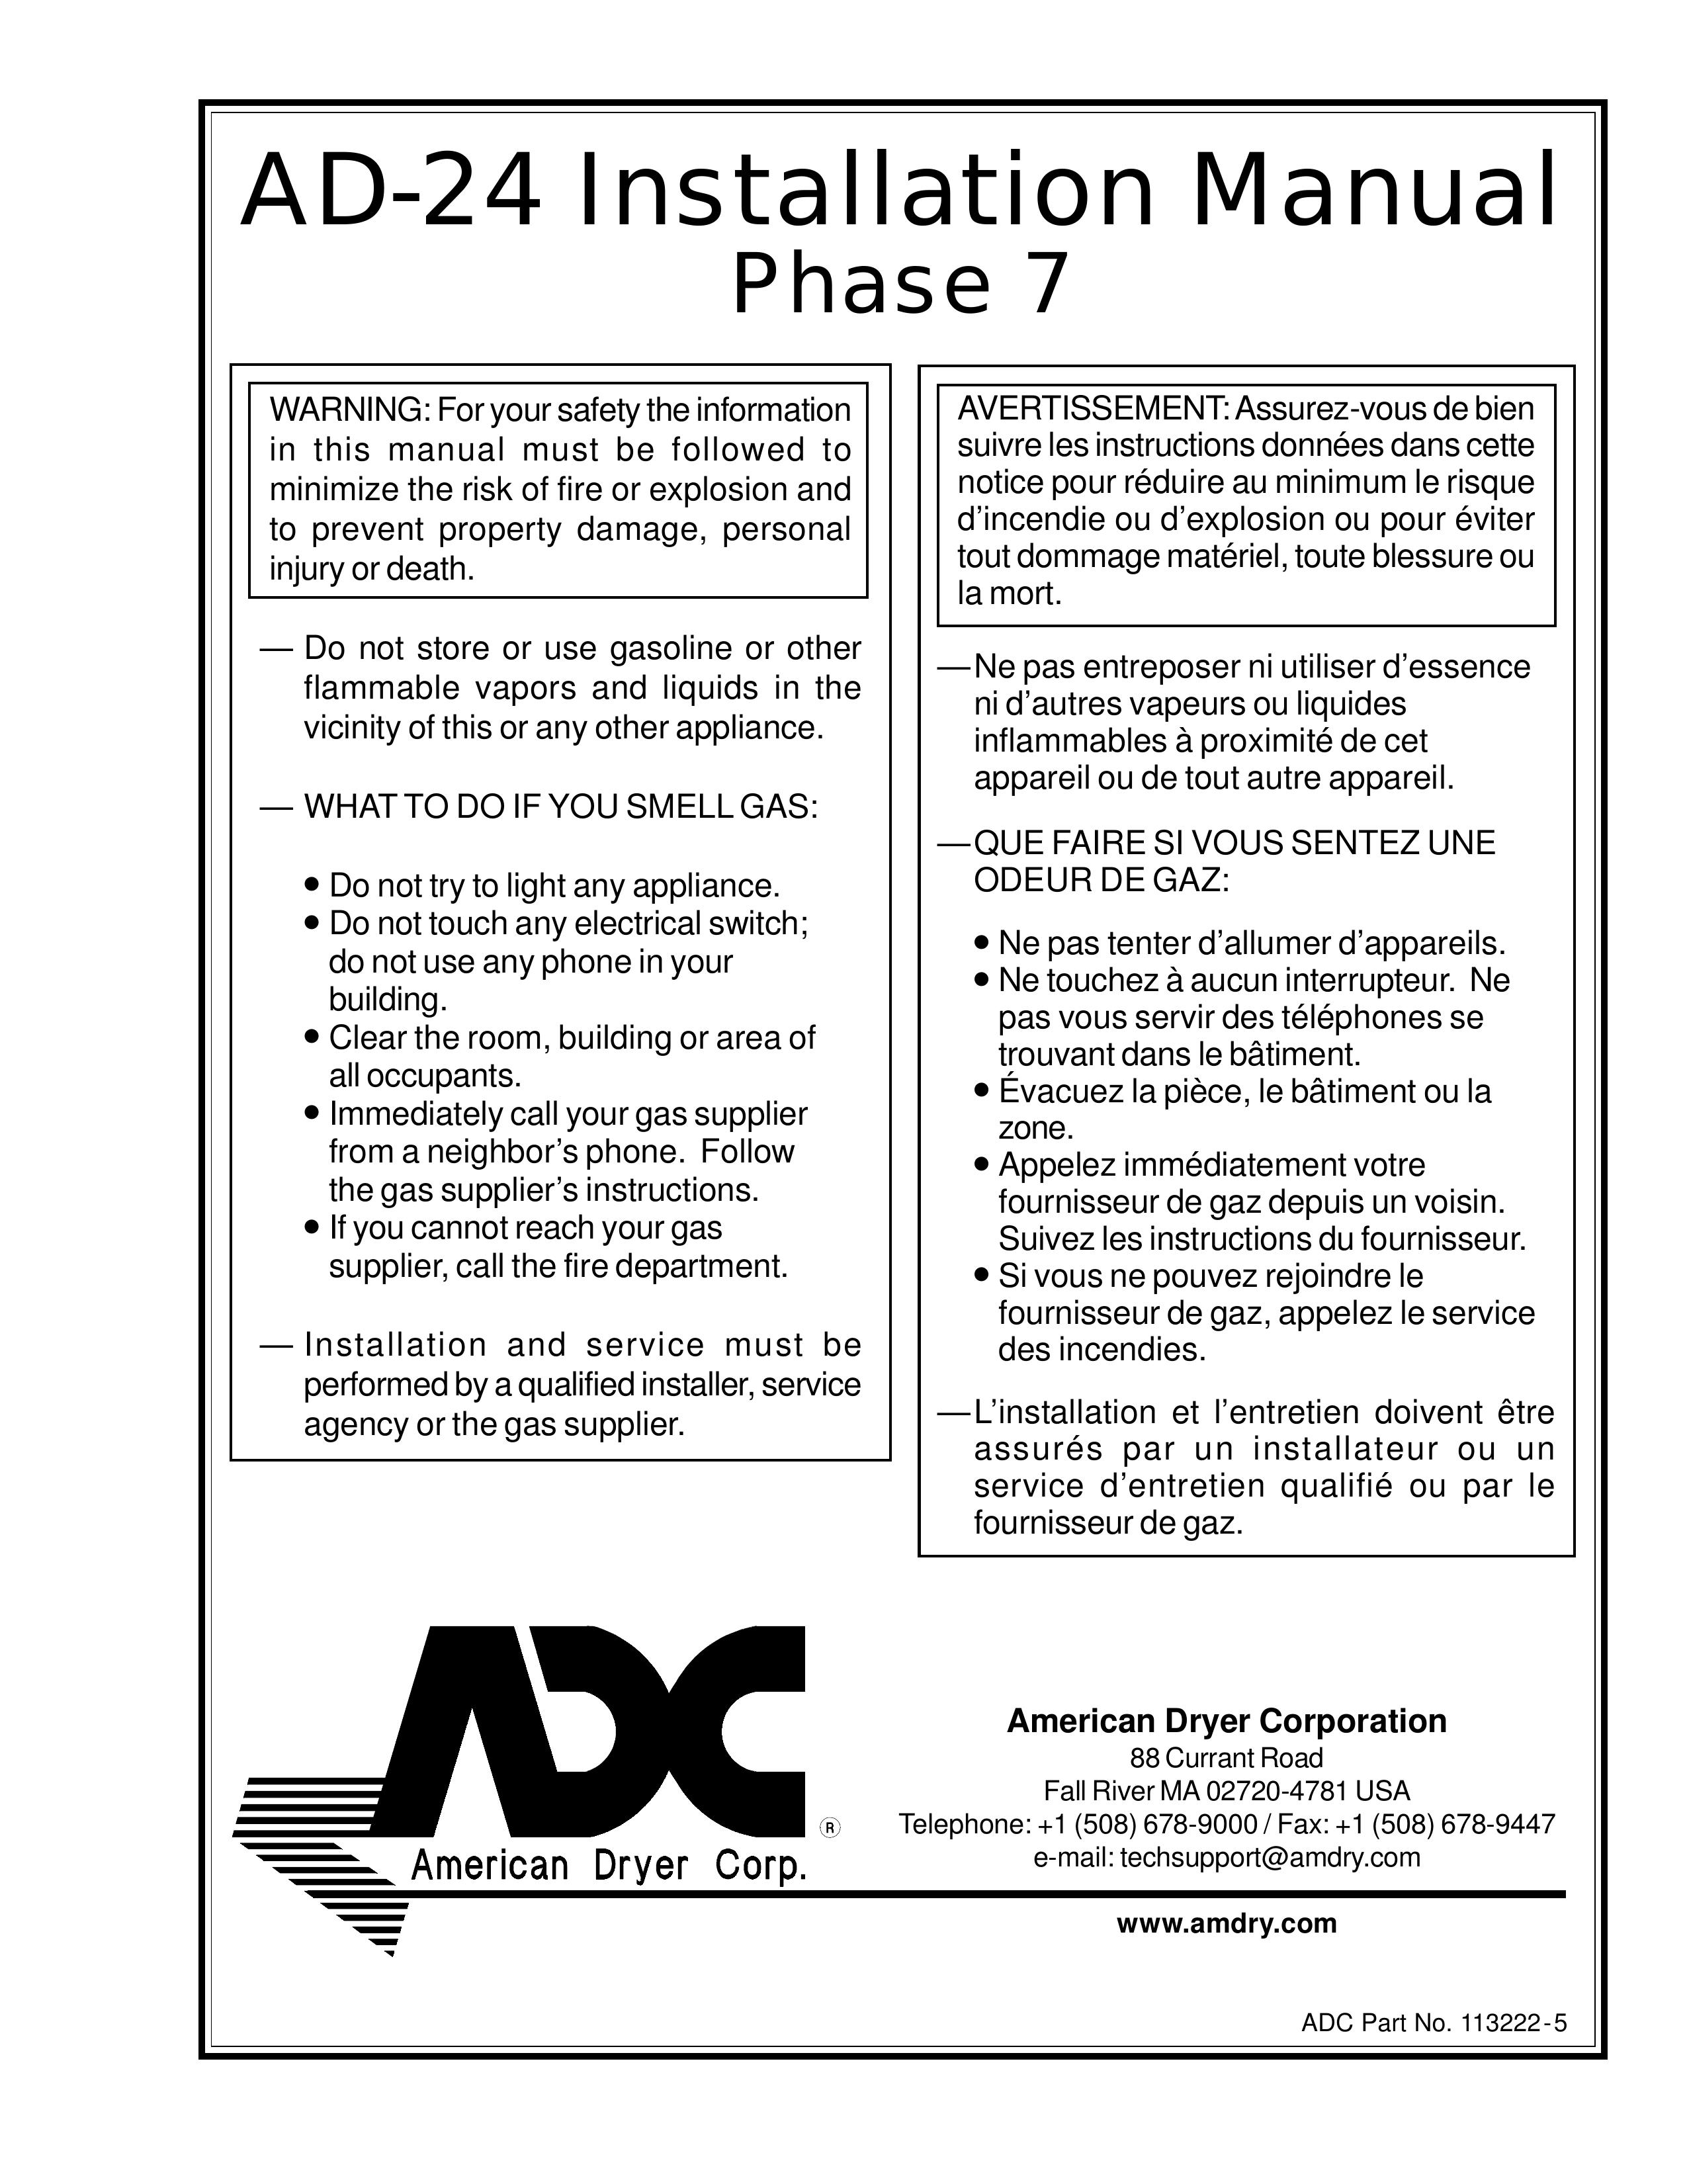 American Dryer Corp. AD-24 Phase 7 Clothes Dryer User Manual